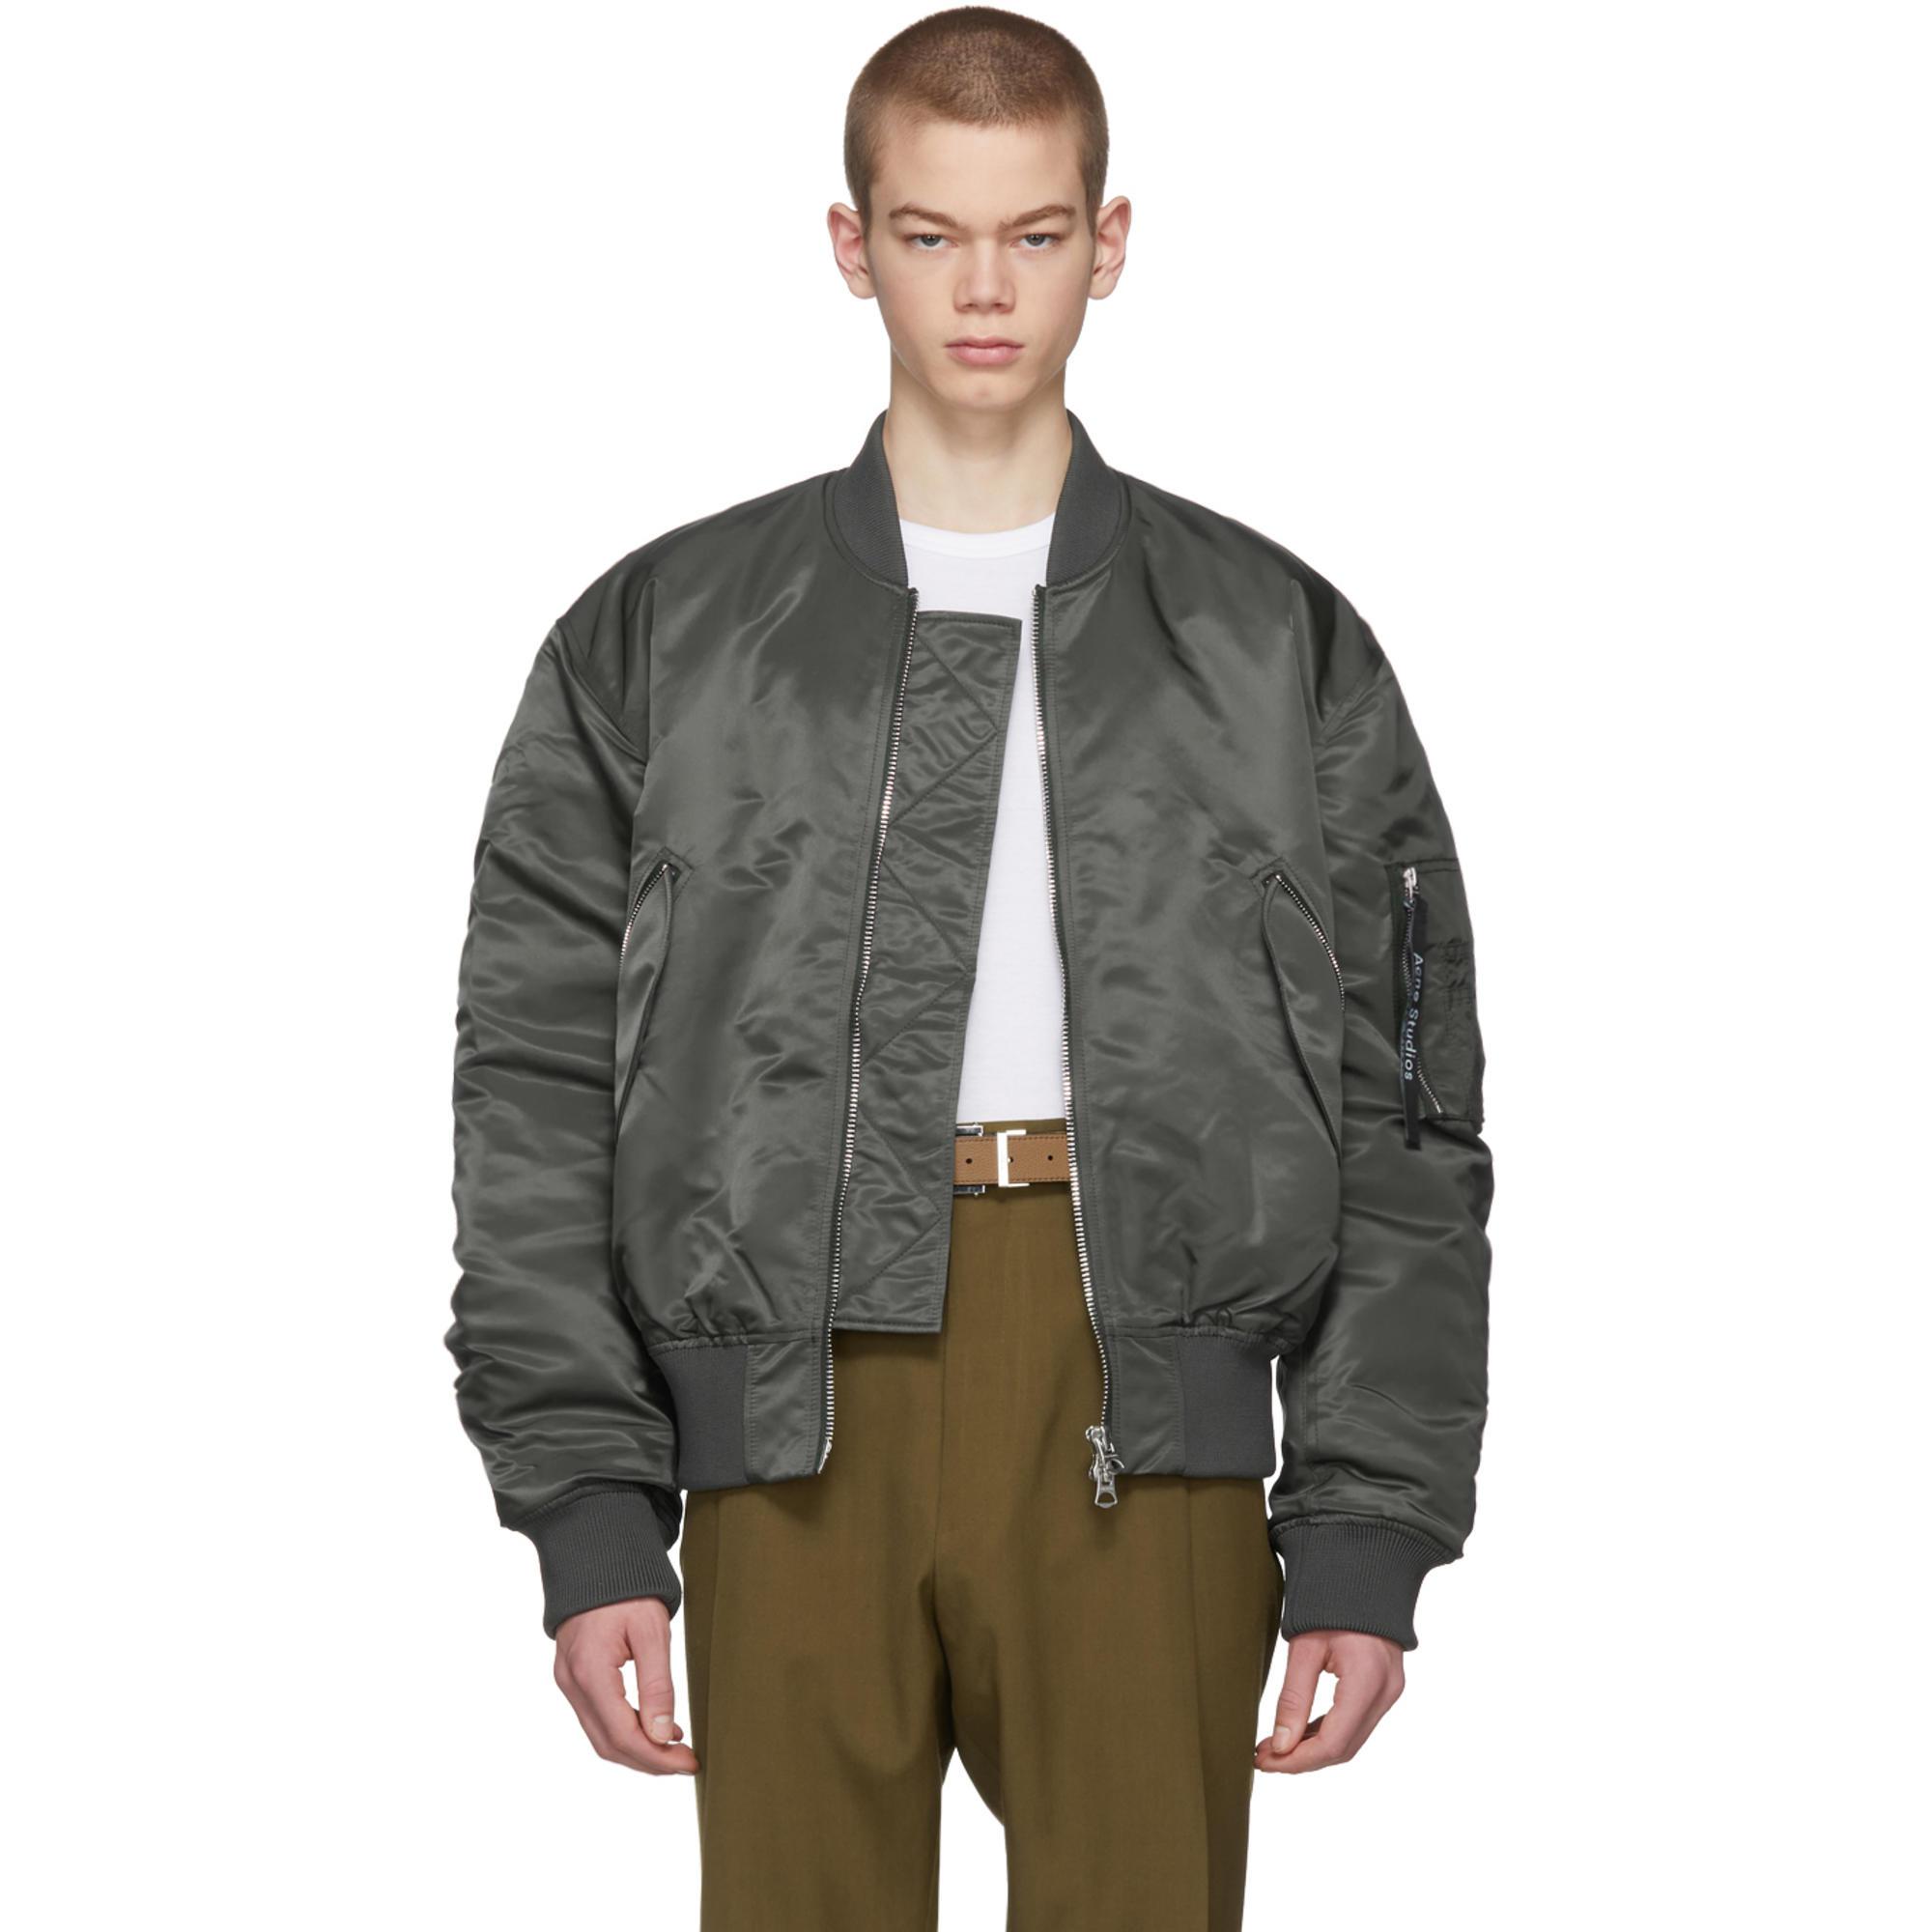 Acne Studios Synthetic Blue Makio Bomber Jacket for Men - Lyst